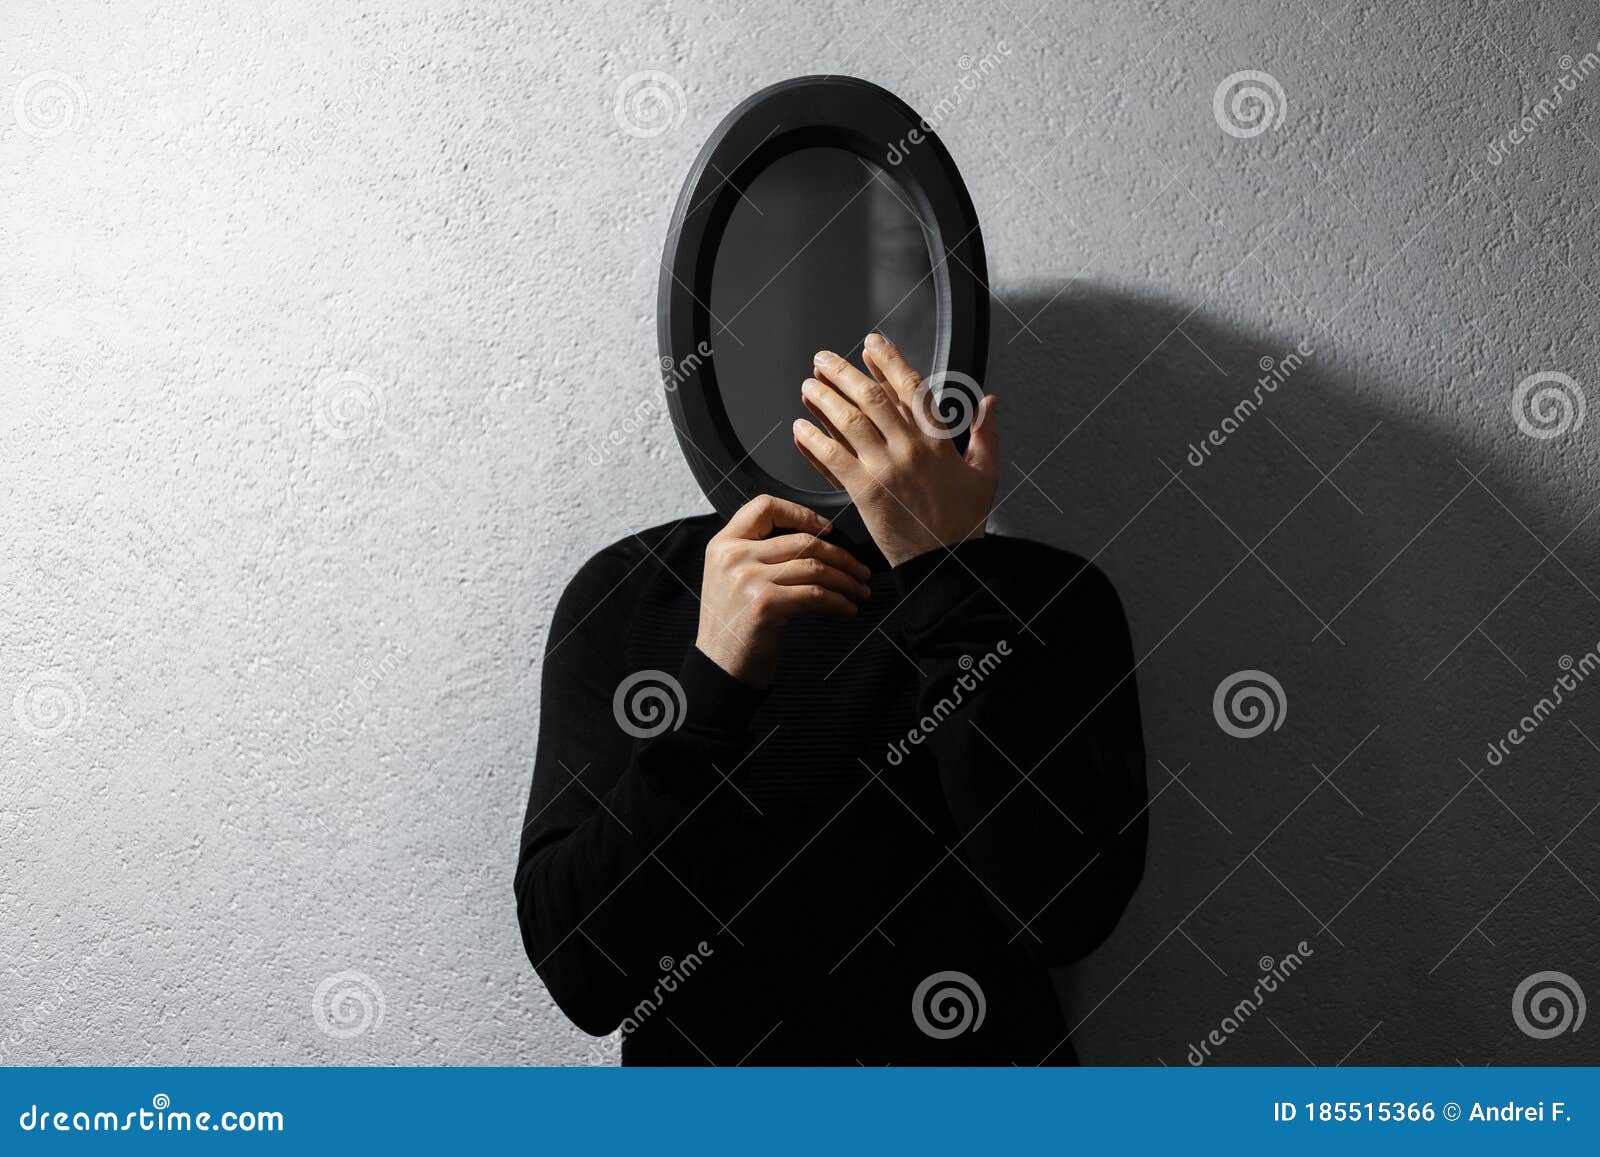 dramatic portrait of young thoughtful guy, looking at his reflection in black oval mirror on textured wall of grey color.